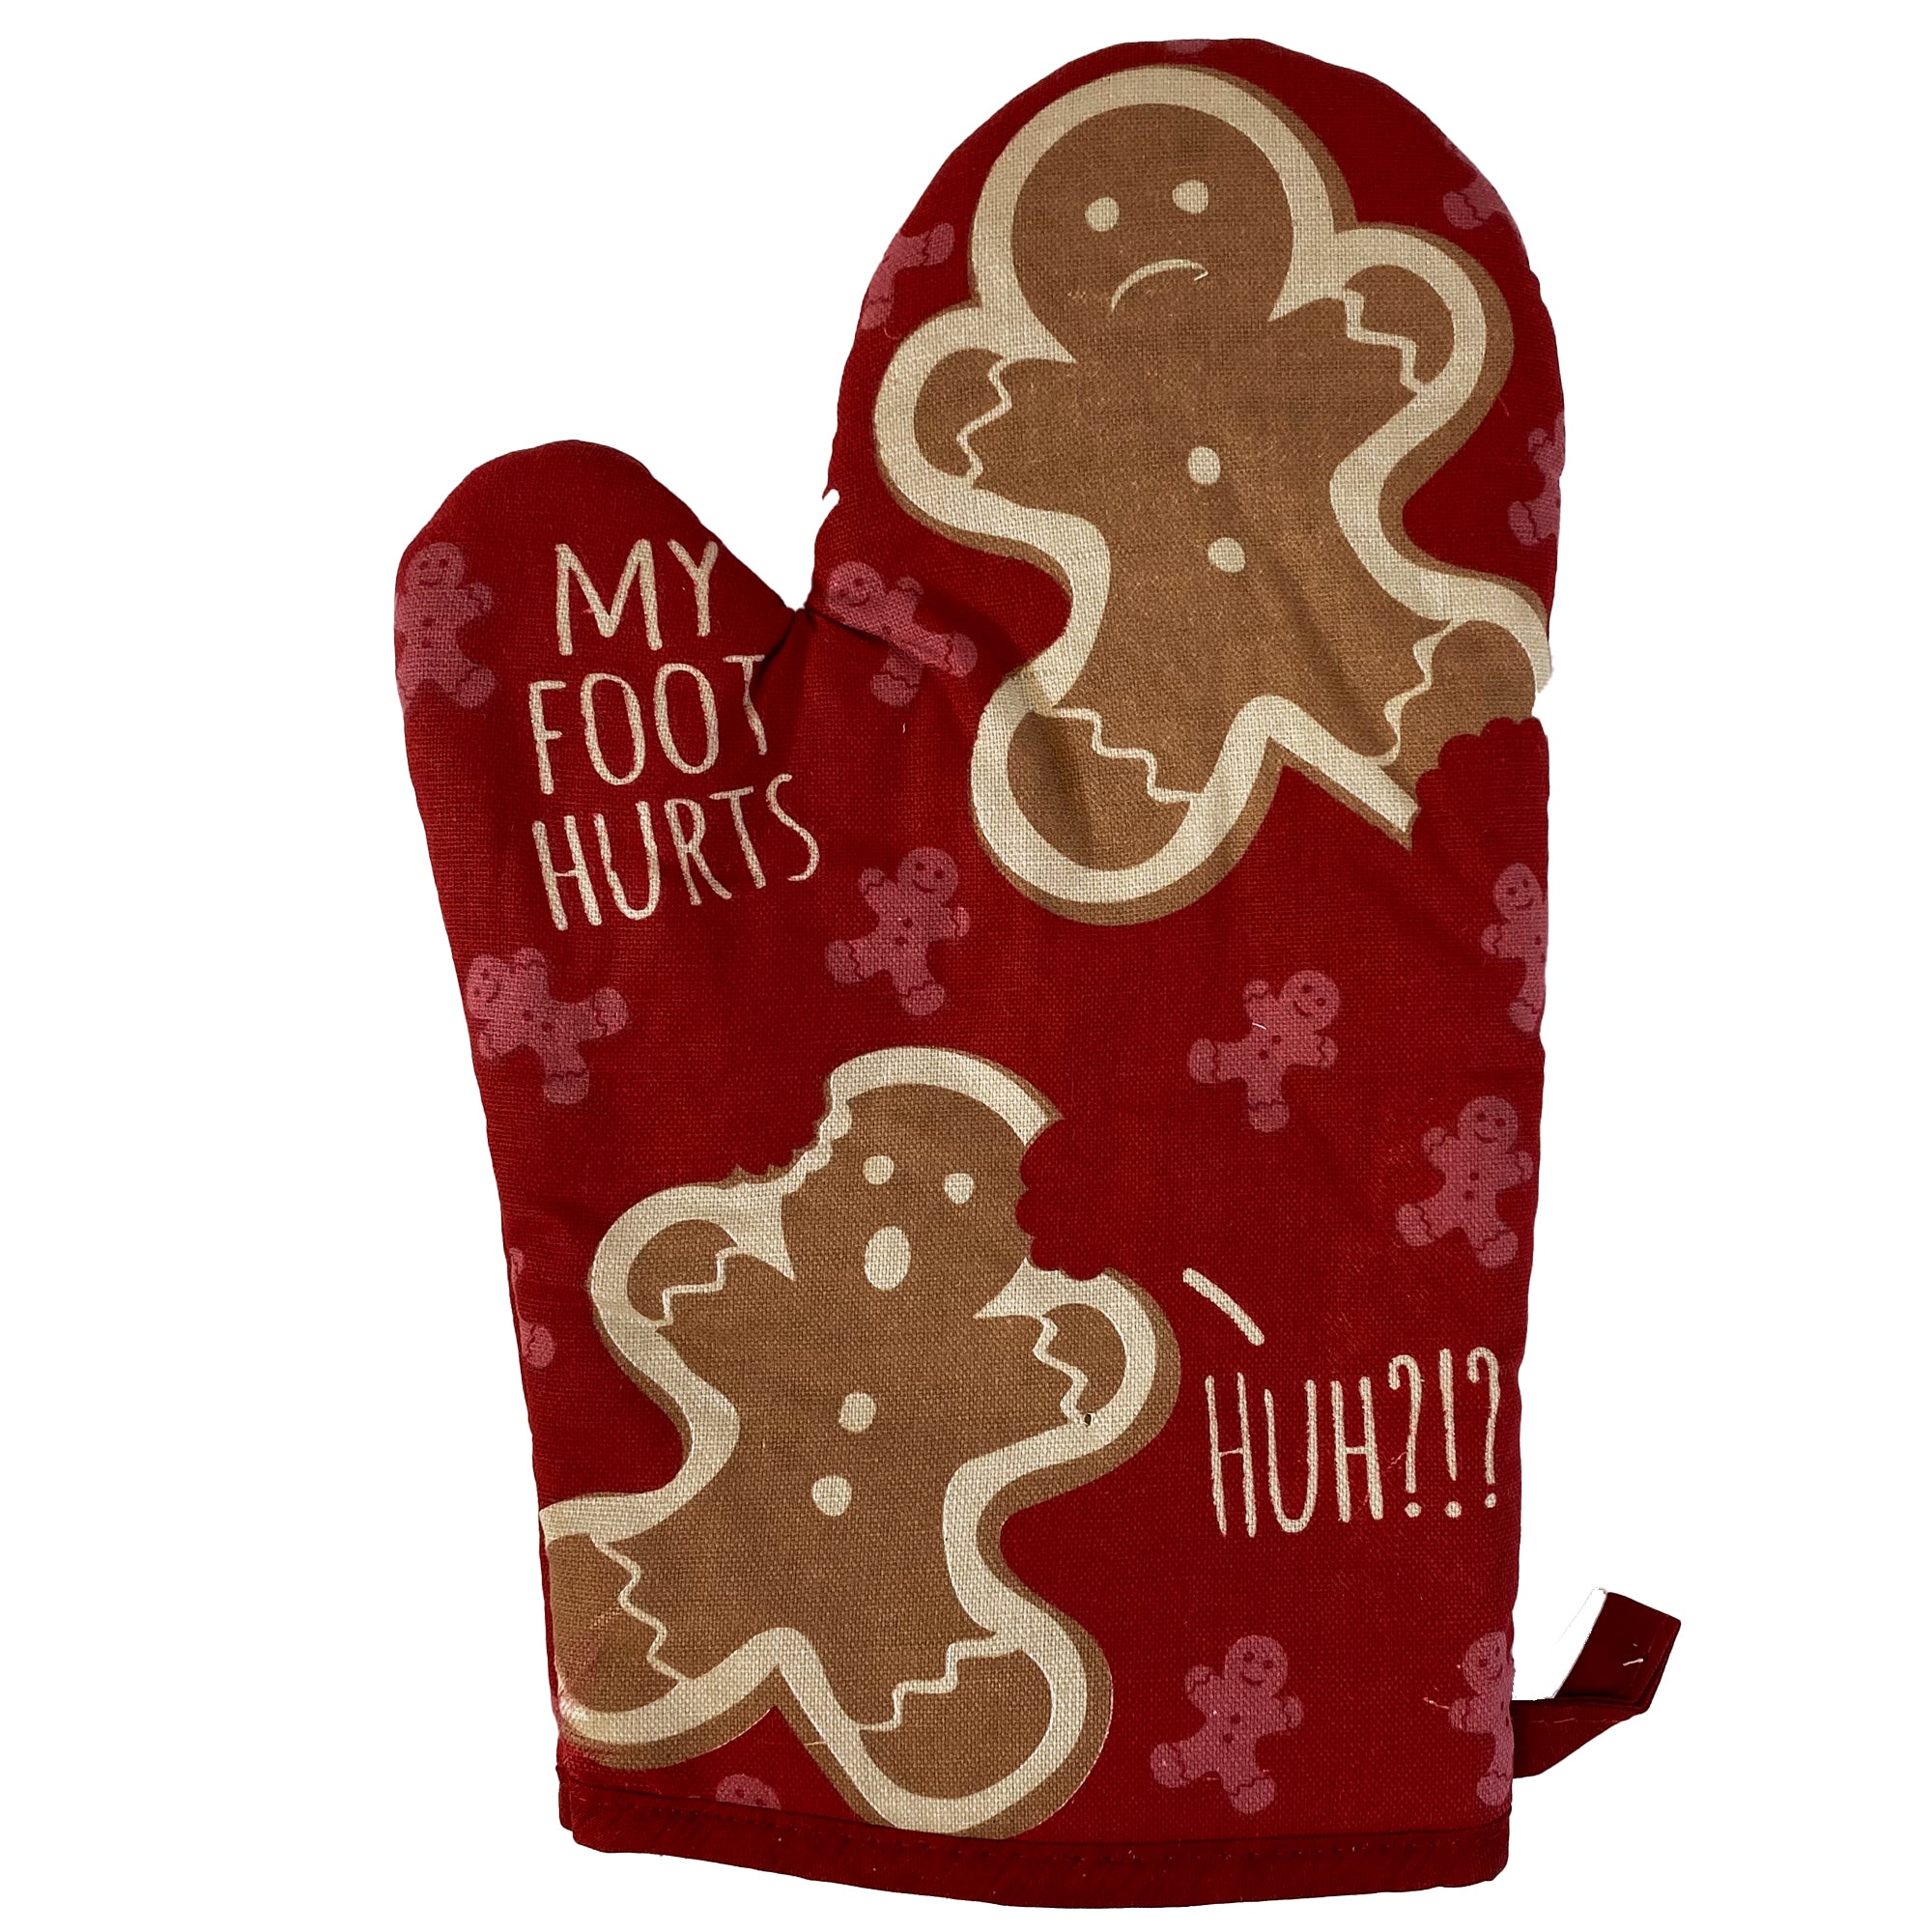 Funny Red My Foot Hurts! Huh? Nerdy Christmas Food Tee